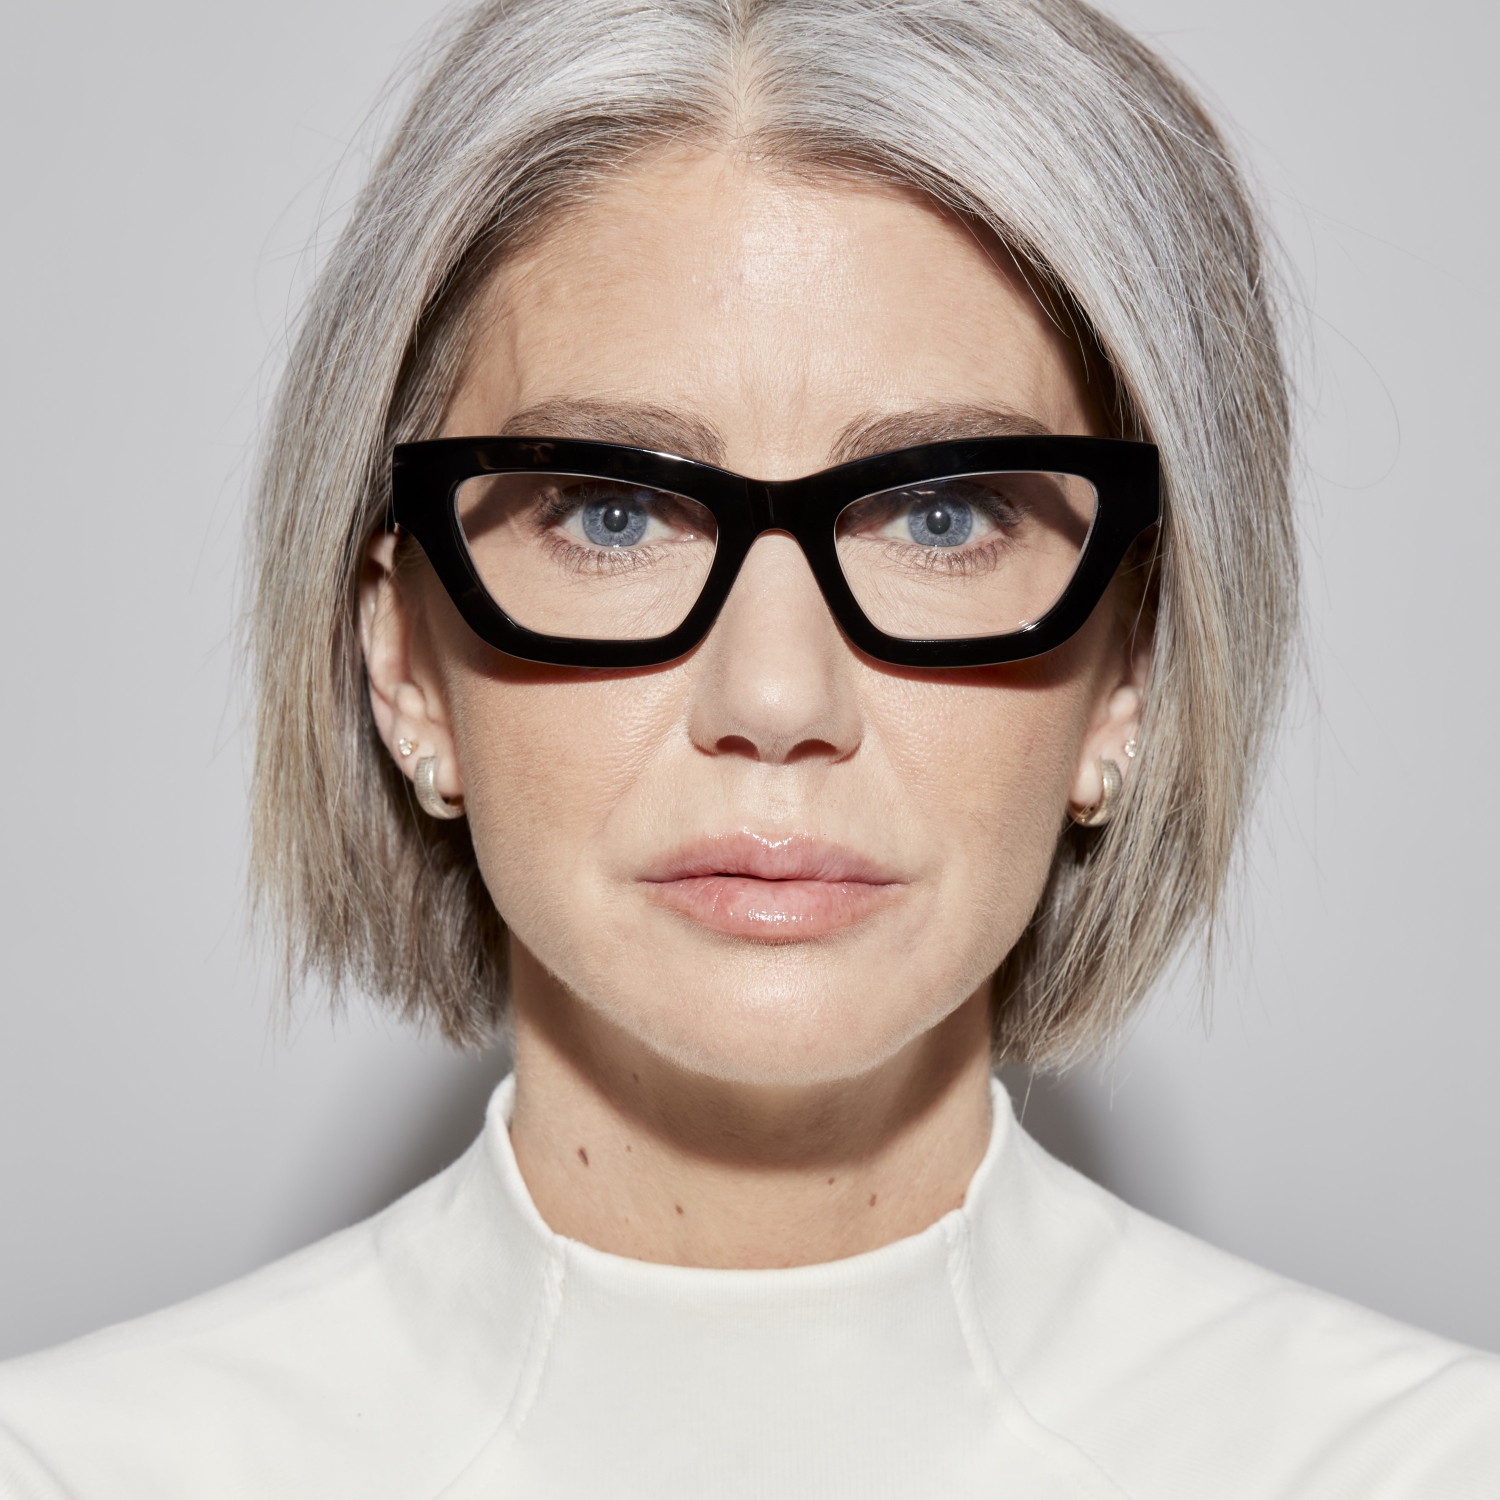 Photo of a man or woman wearing Jade Cherry Reading Glasses by French Kiwis